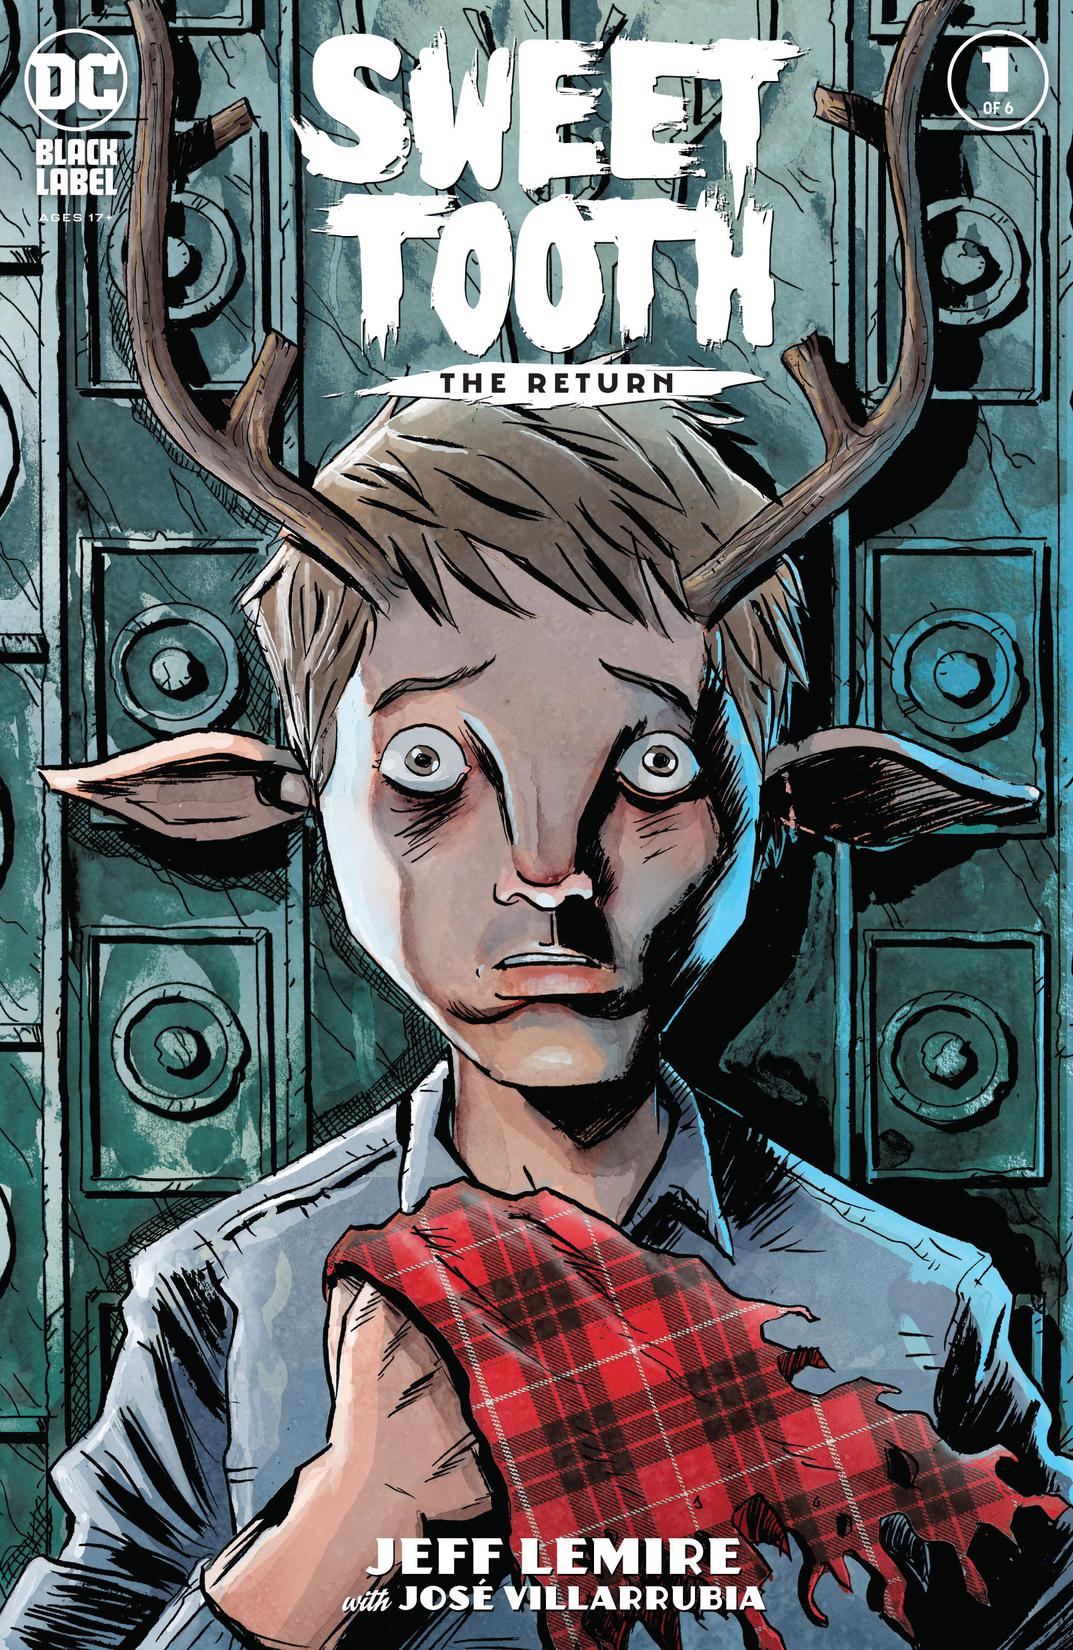 Sweet Tooth: The Return #1 preview images